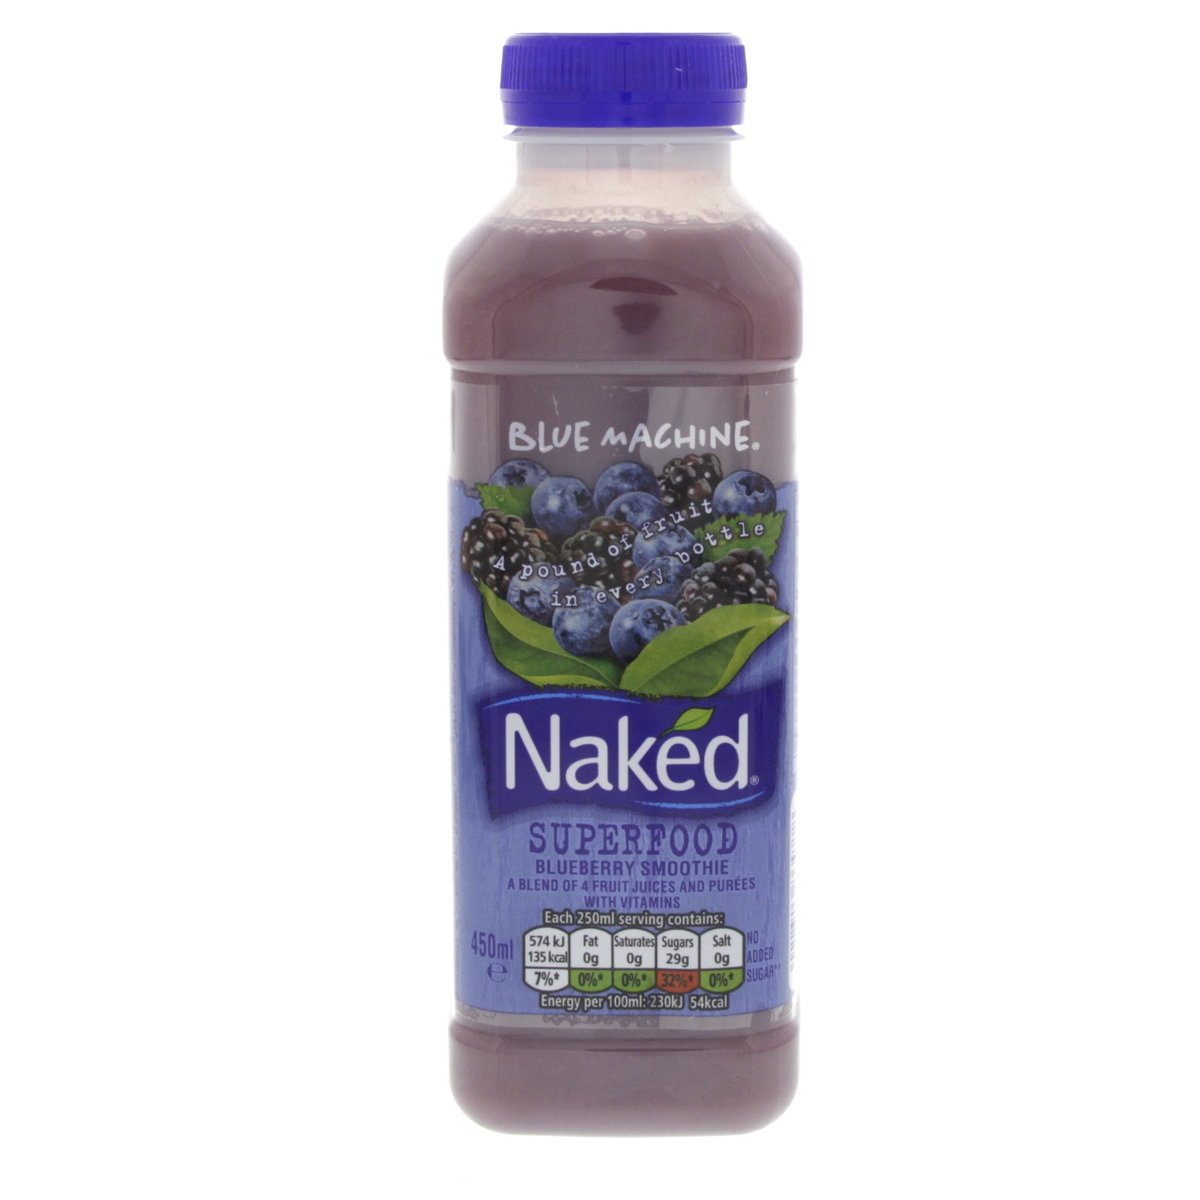 Naked Superfood Blueberry Smoothie 450 ml